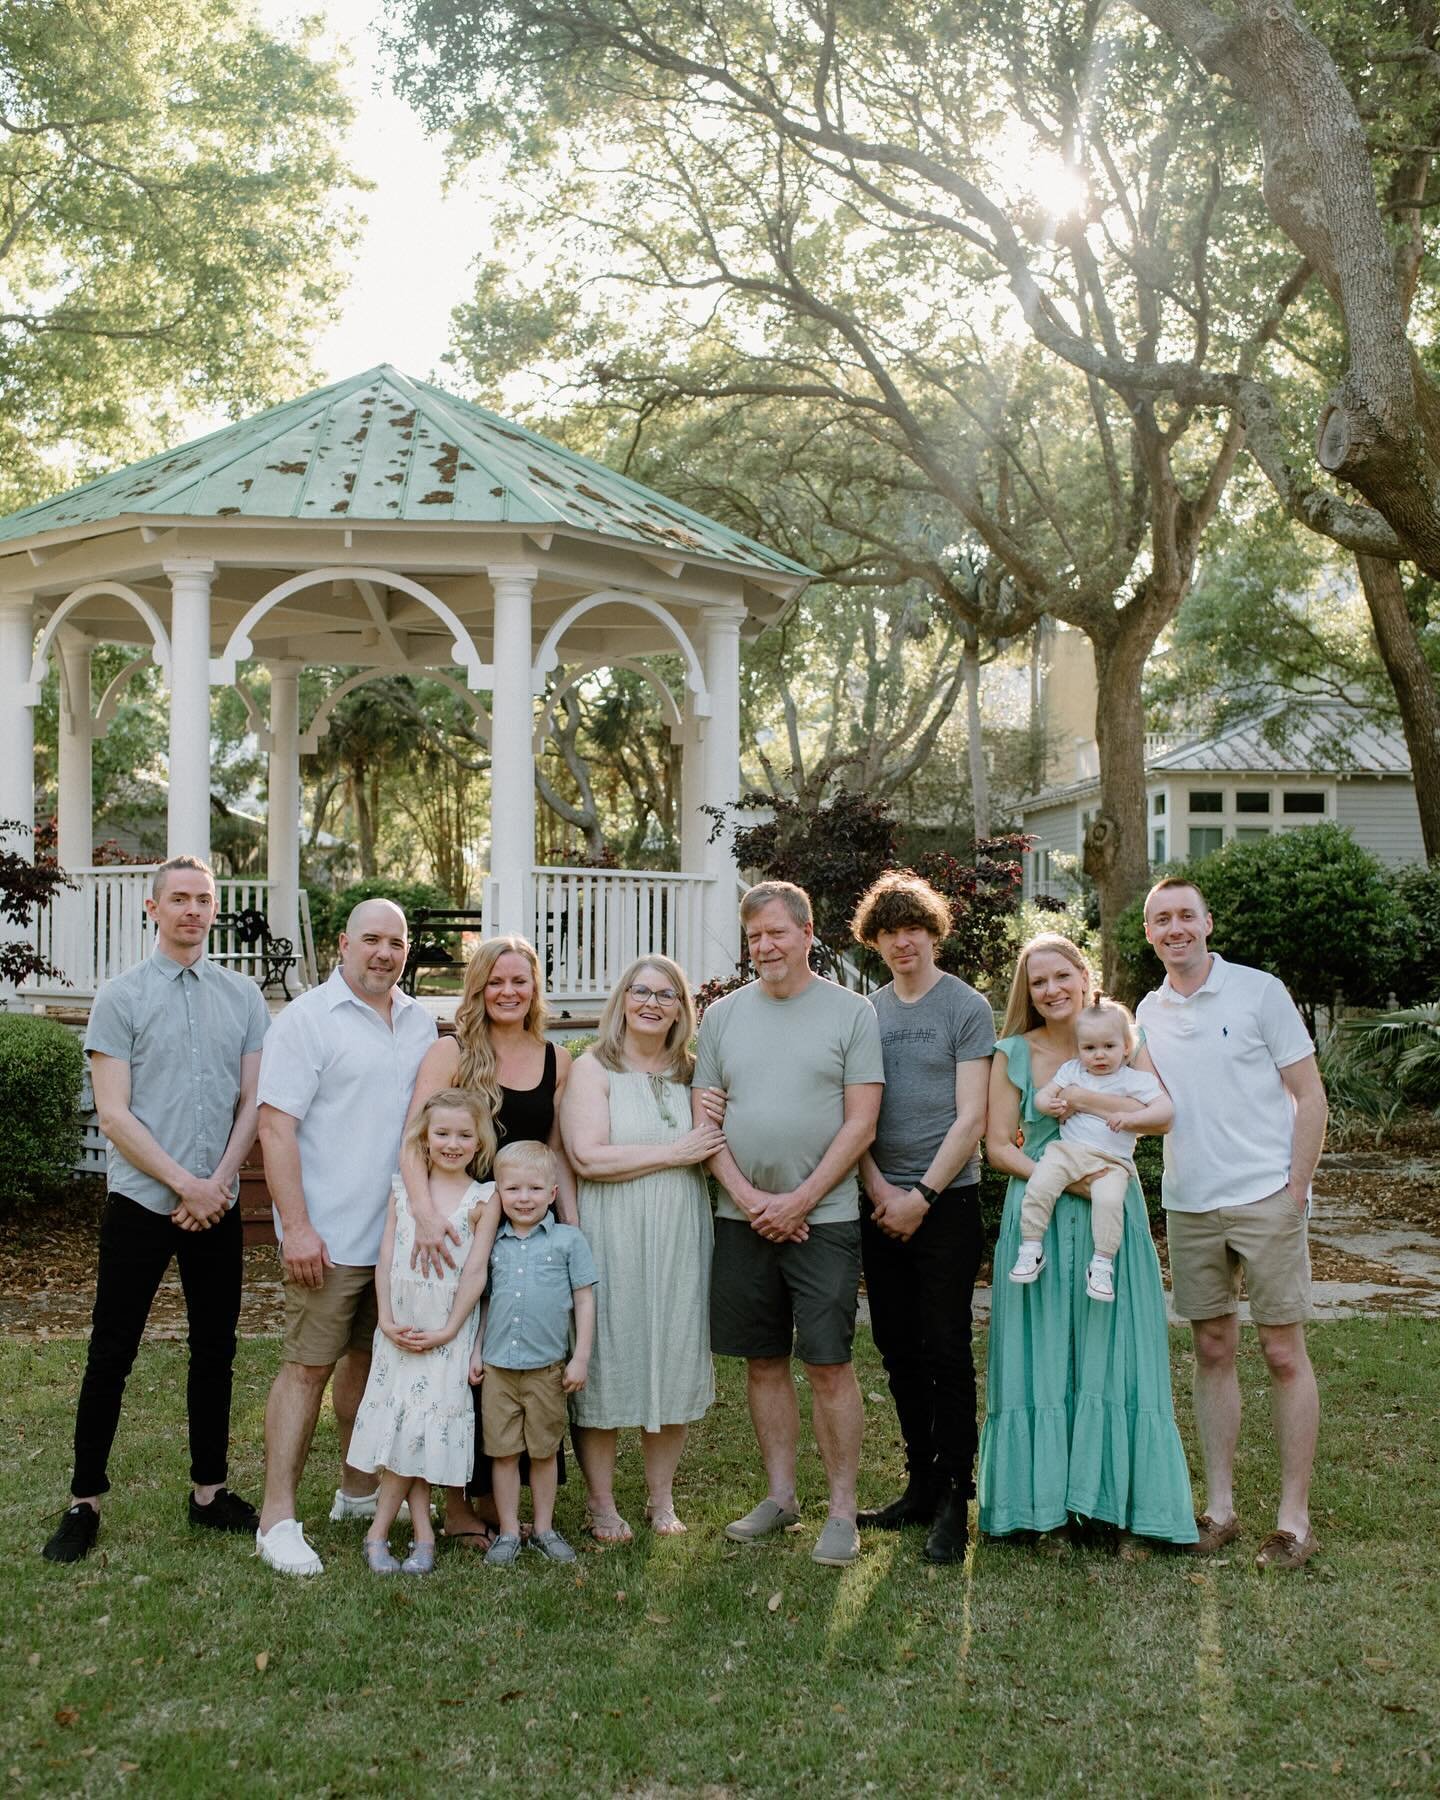 Taking family photos brings lots of feelings about the joy that it is to cherish your own 💫 there are never too many photos to remember all the moments you share together and I am so happy I get to capture some of yours.